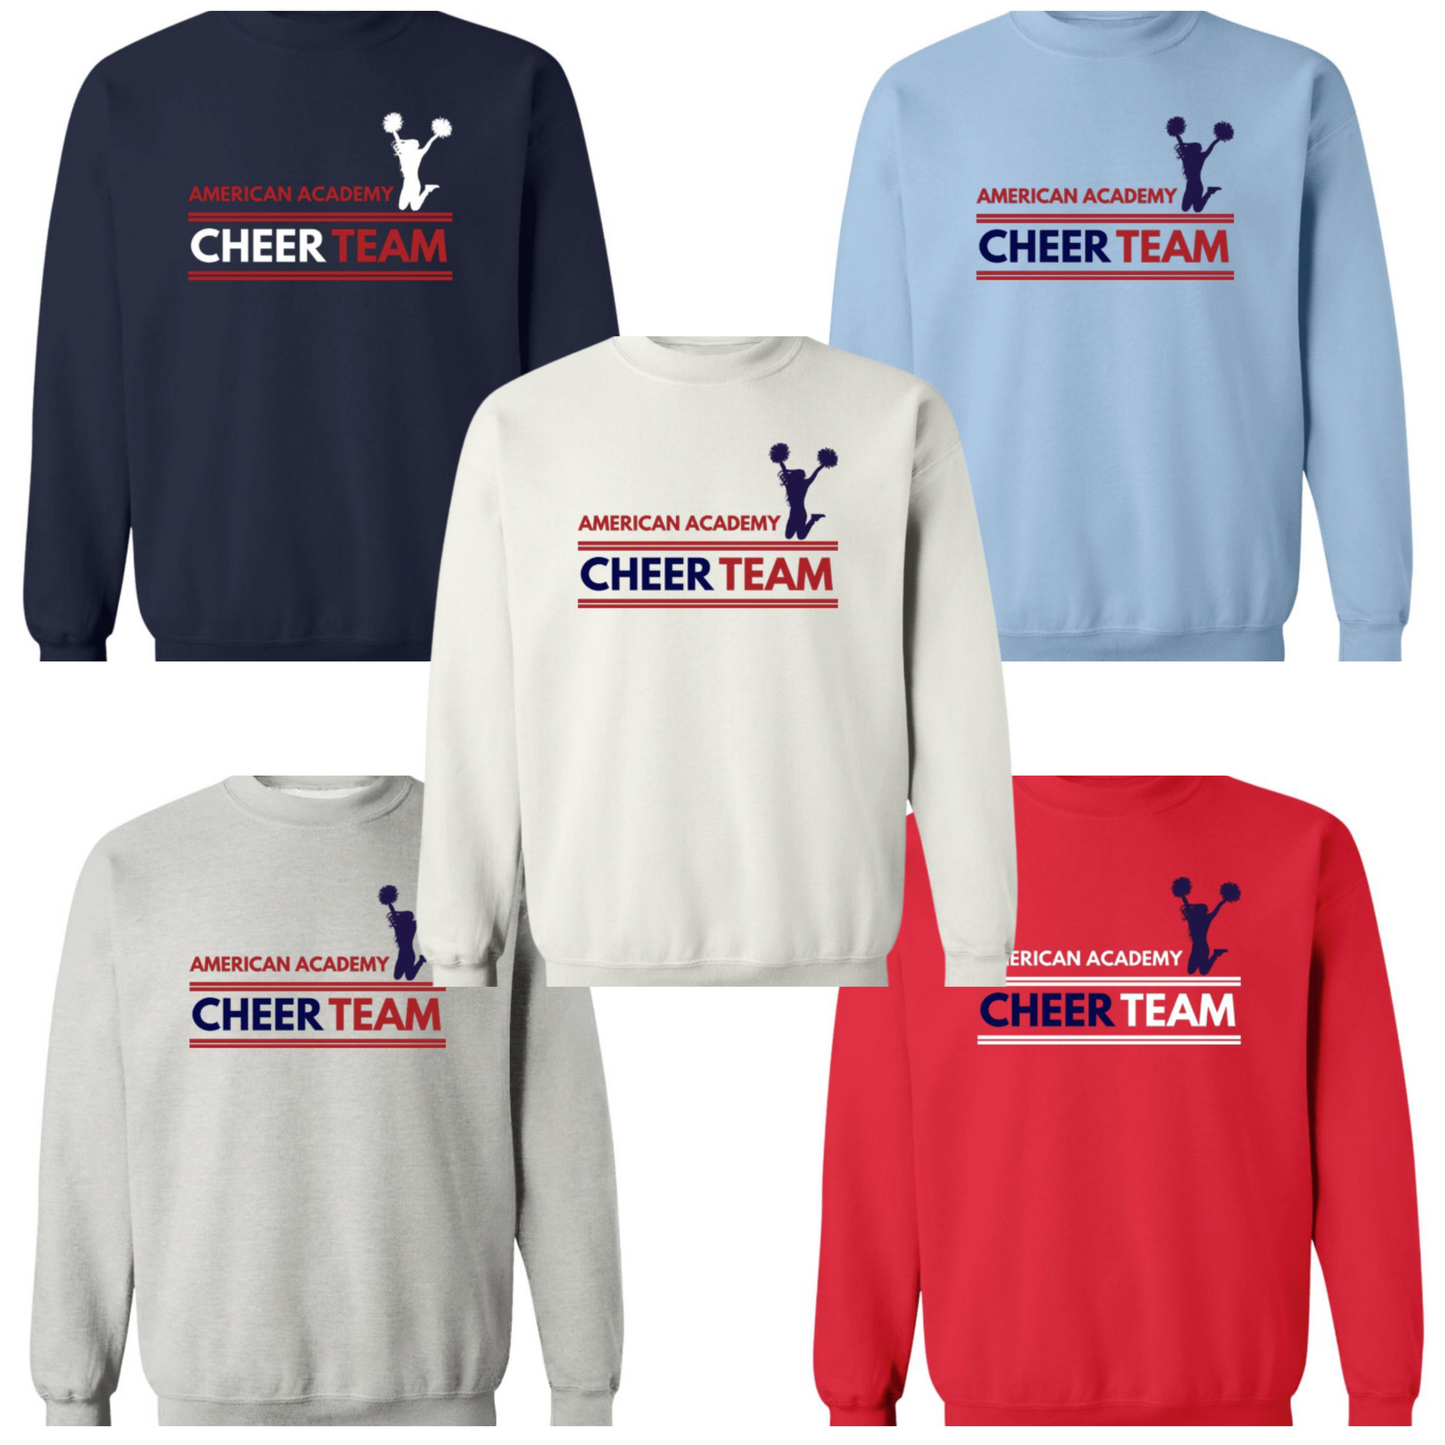 American Academy Cheer Team- Adult Sizes